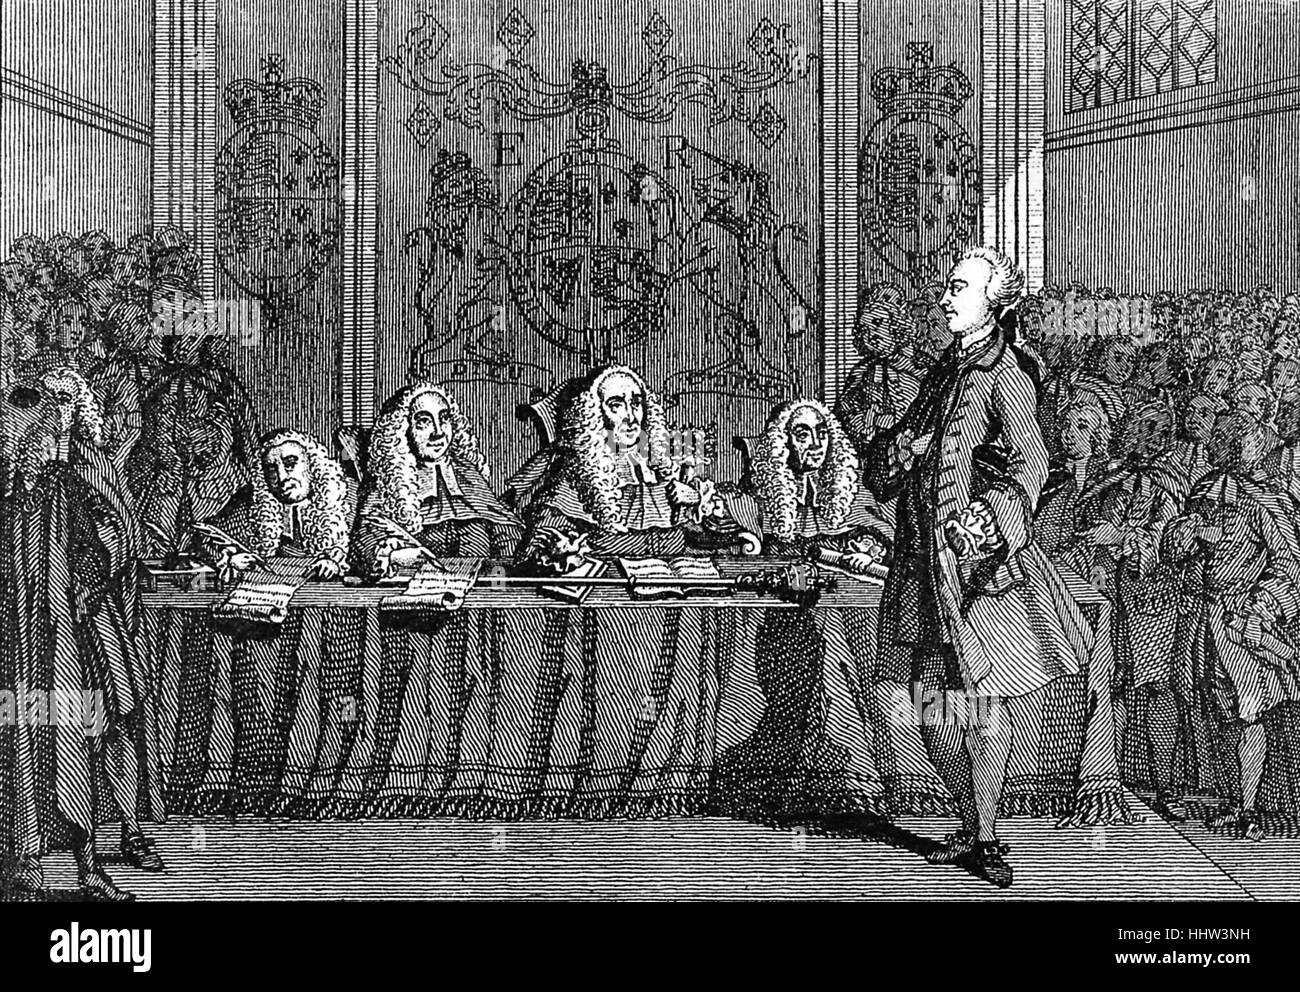 John Wilkes before the Court of the King's Bench 1768. 18th century courtroom scene. JW: English journalist and politician 17 Stock Photo